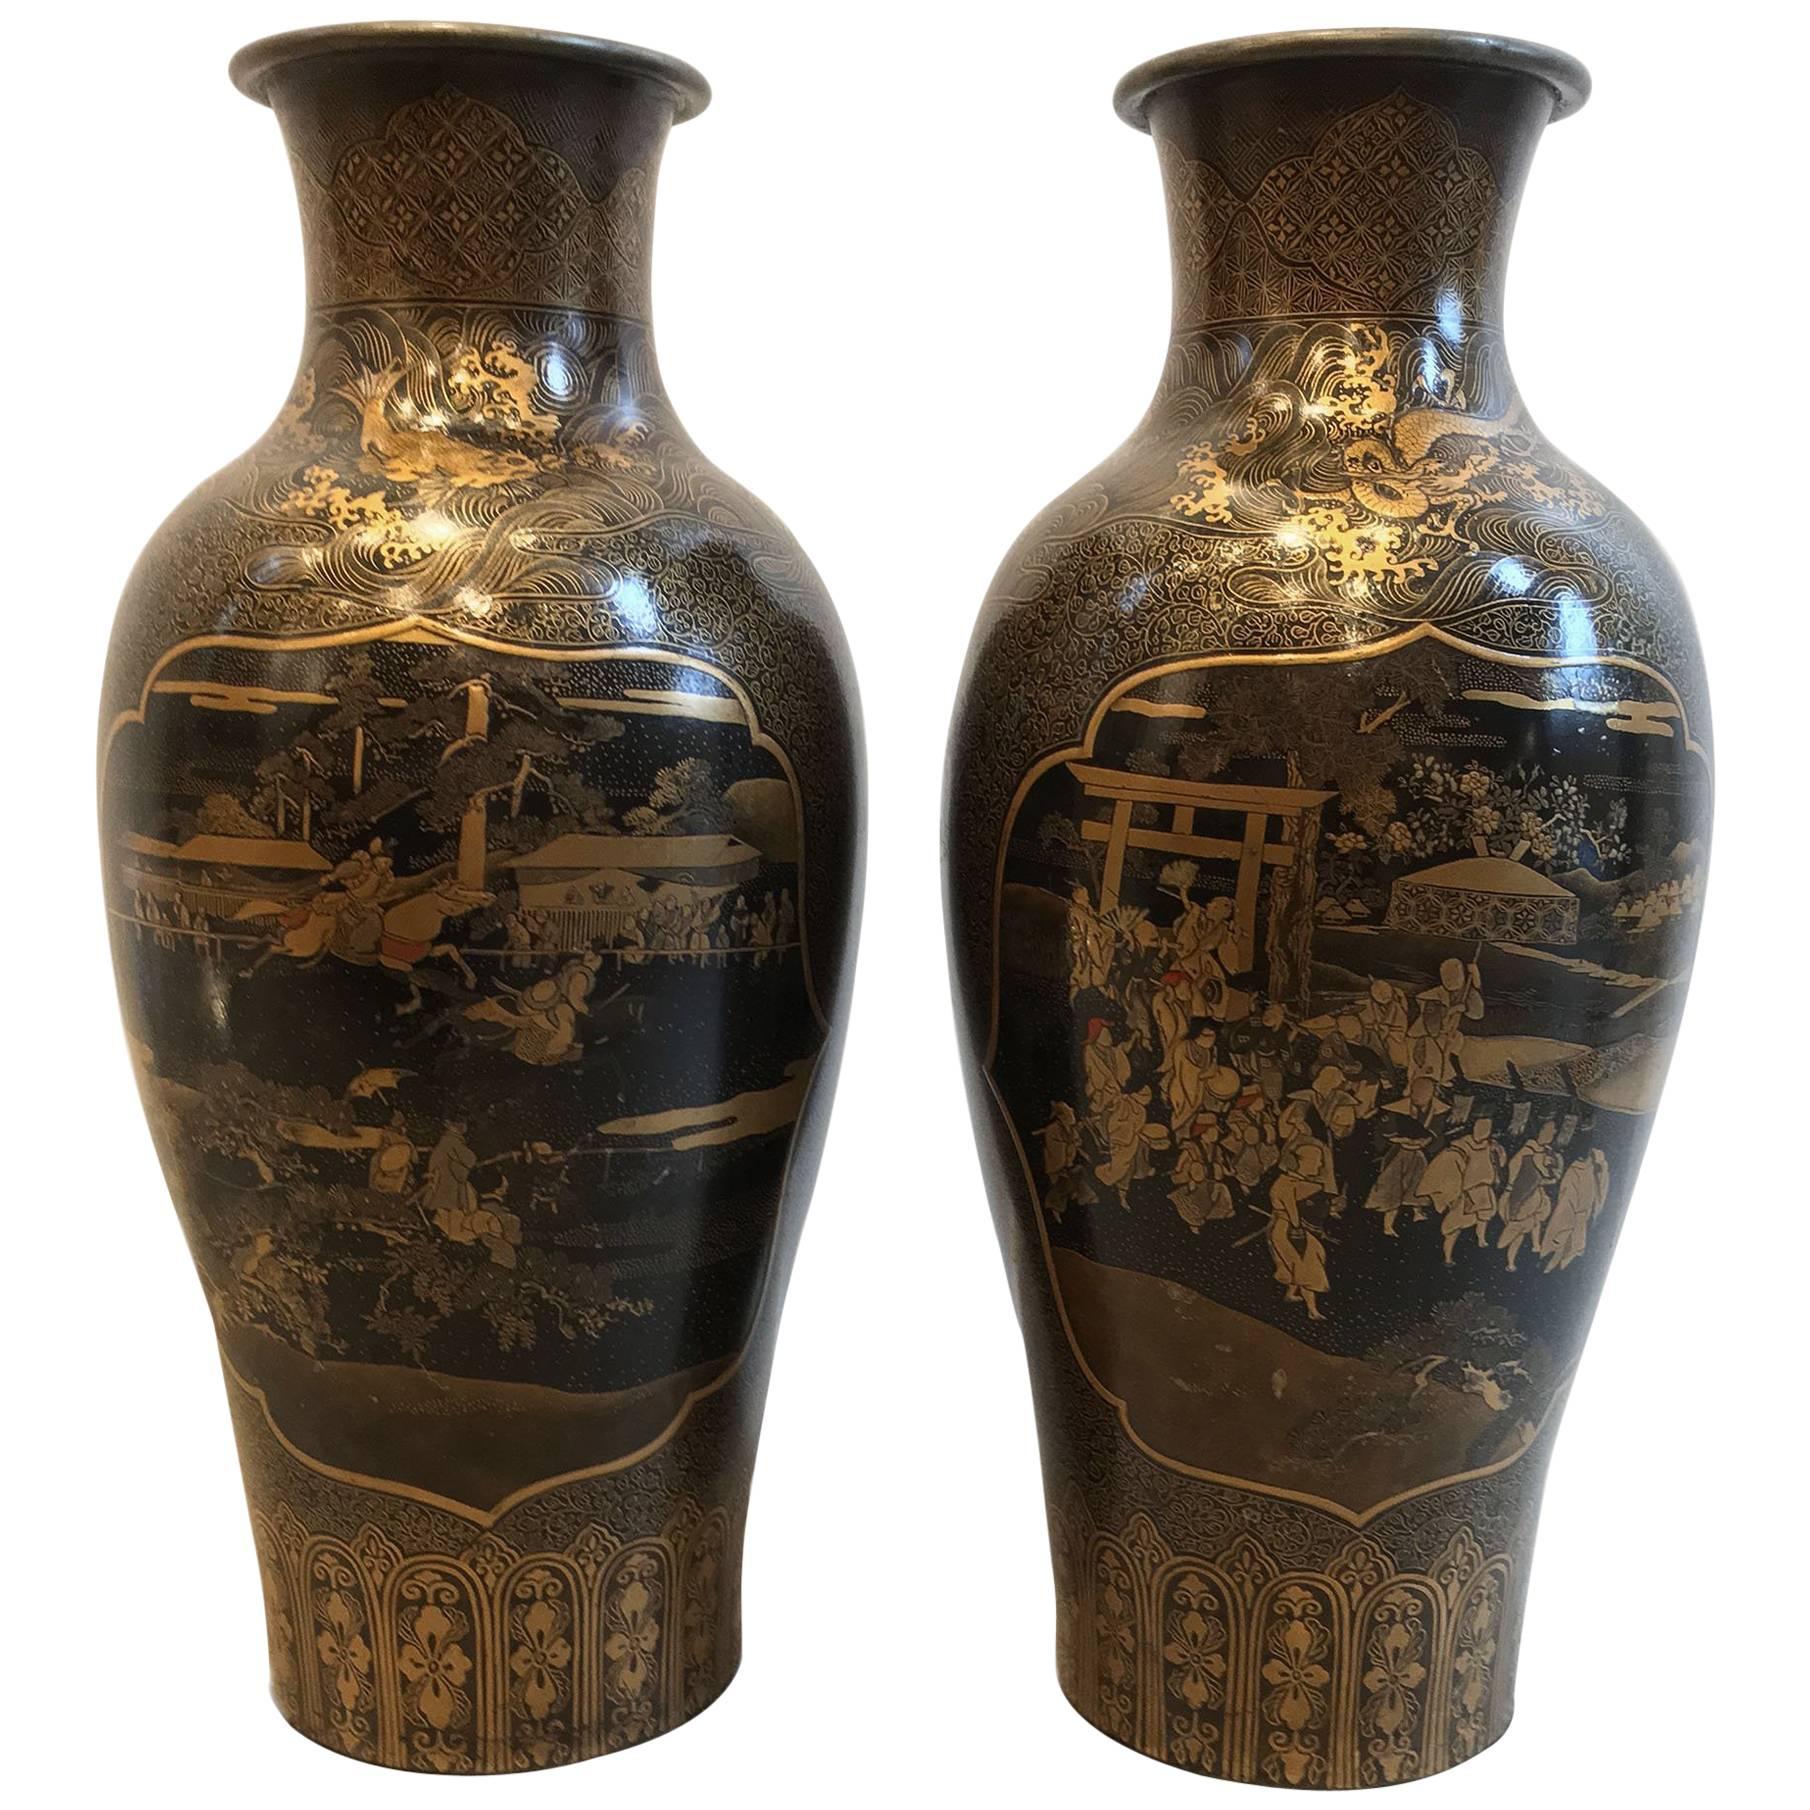 Pair of Asian Chinese 'Late 19th Century' Black and Gilt Lacquer Decorated Vases